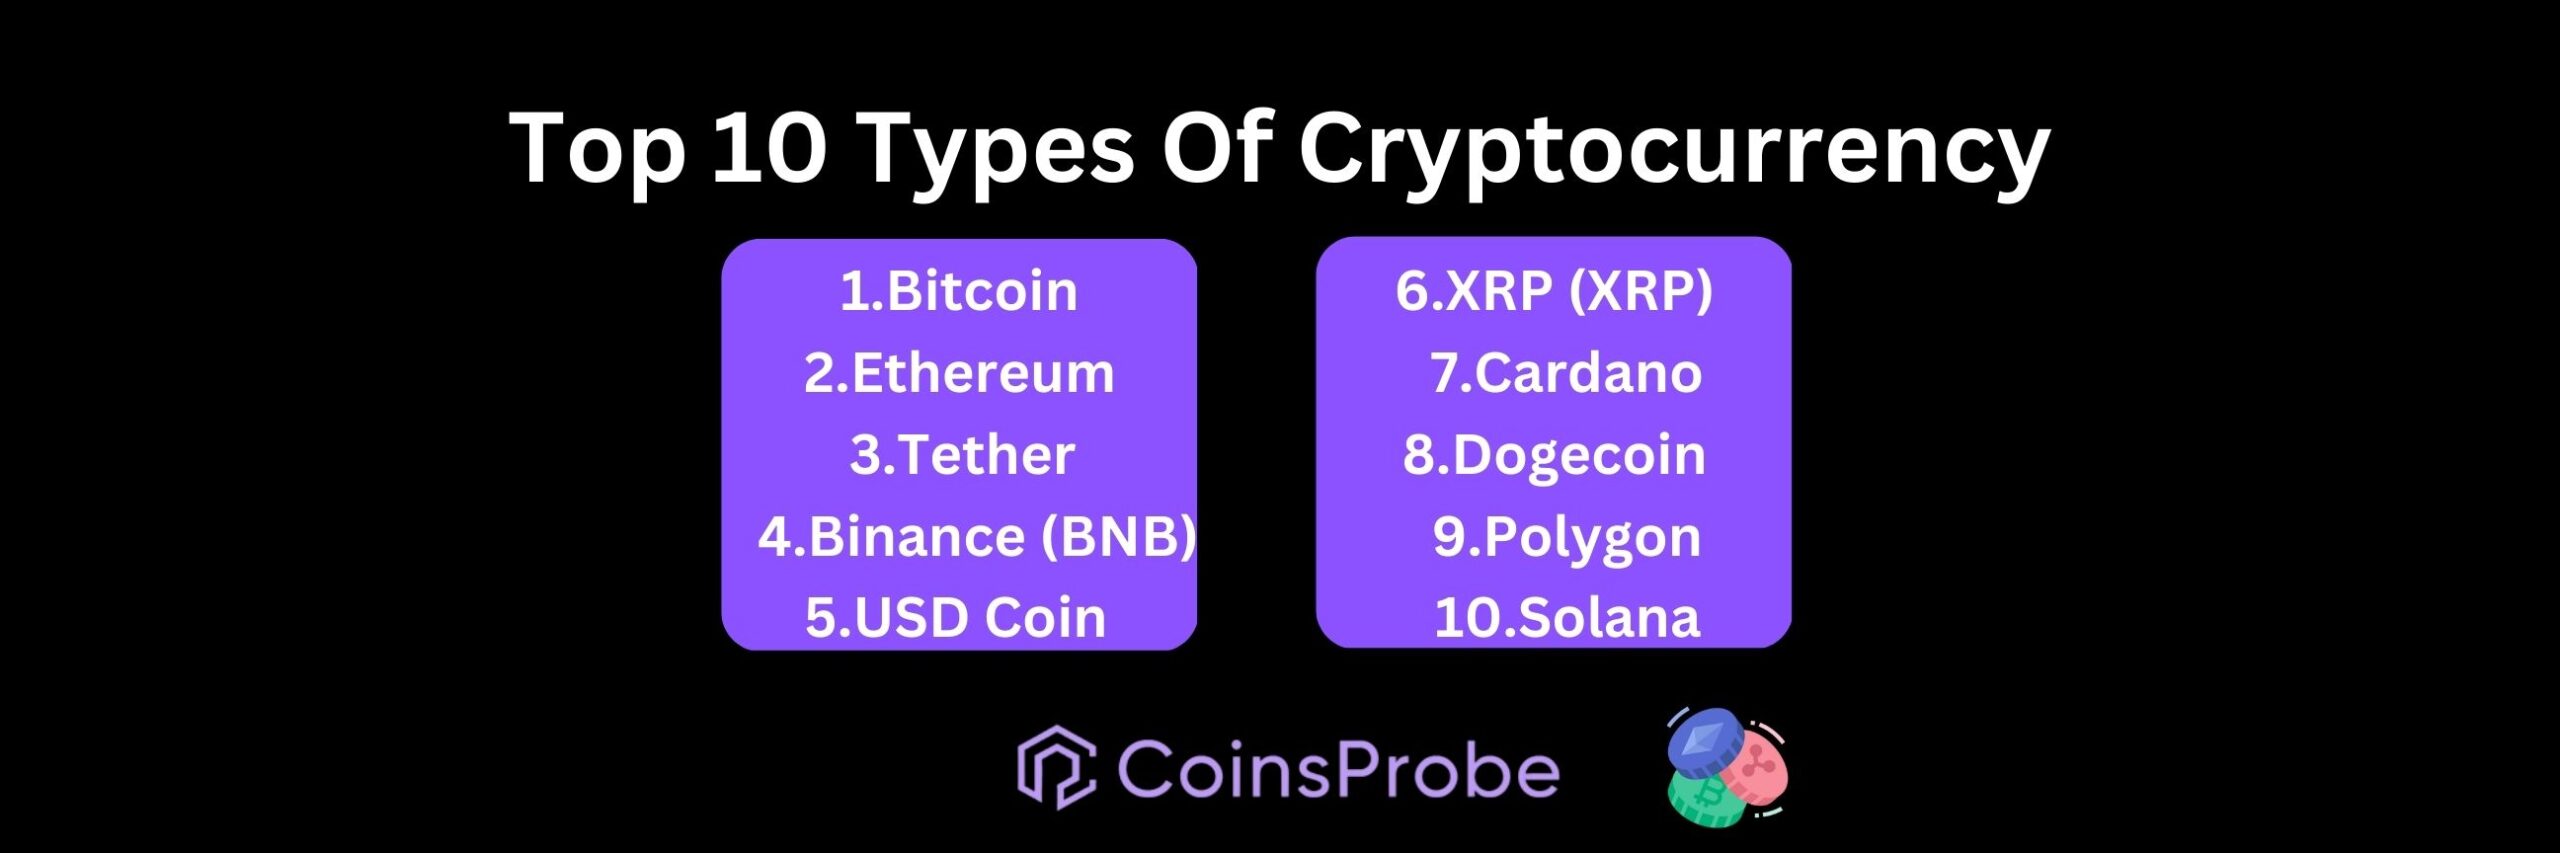  Top 10 types of cryptocurrency